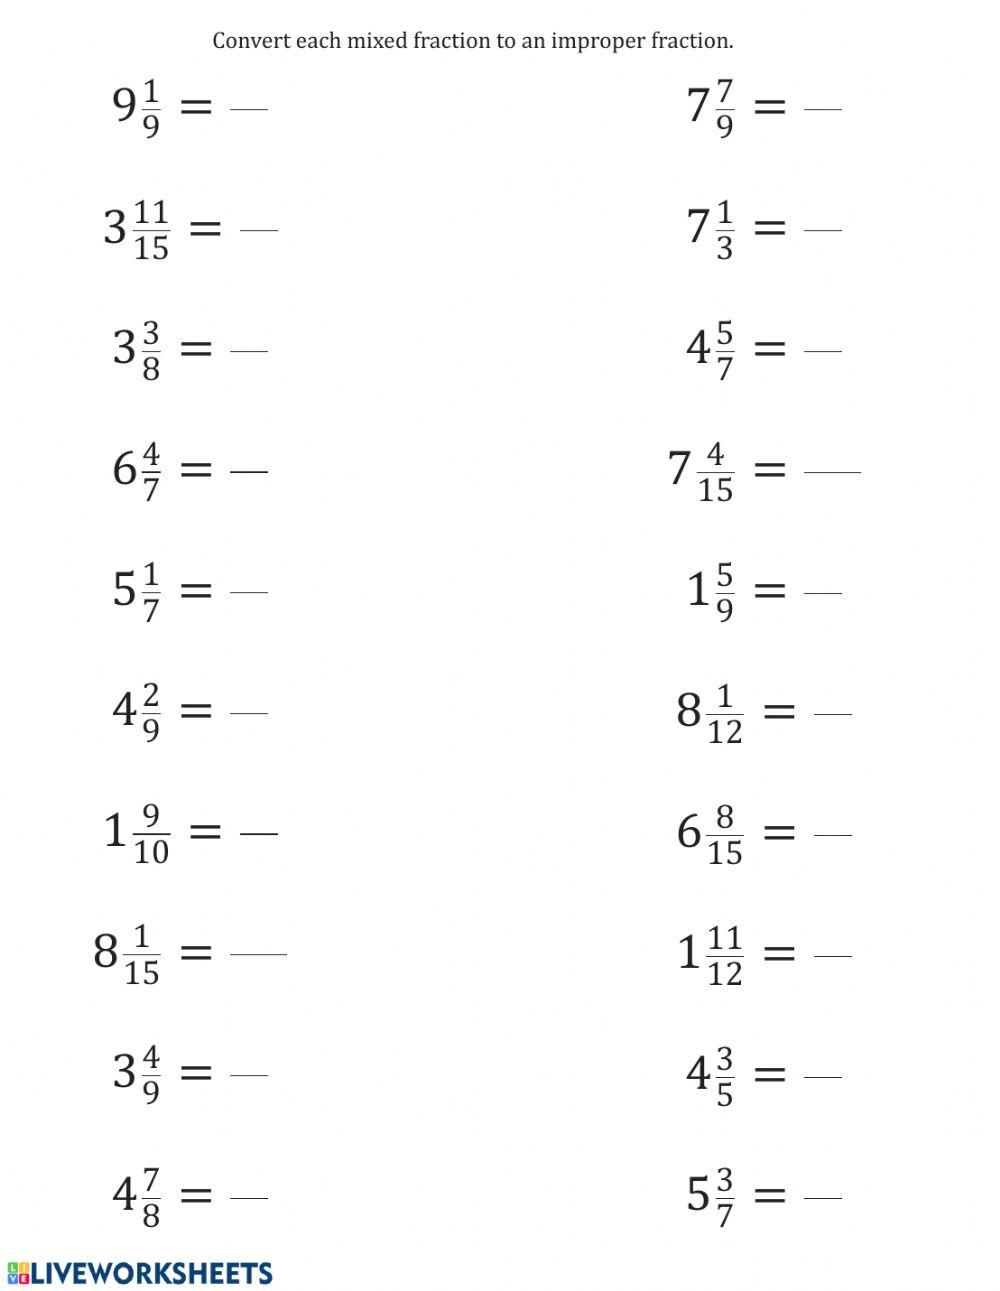 Converting improper to mixed fractions